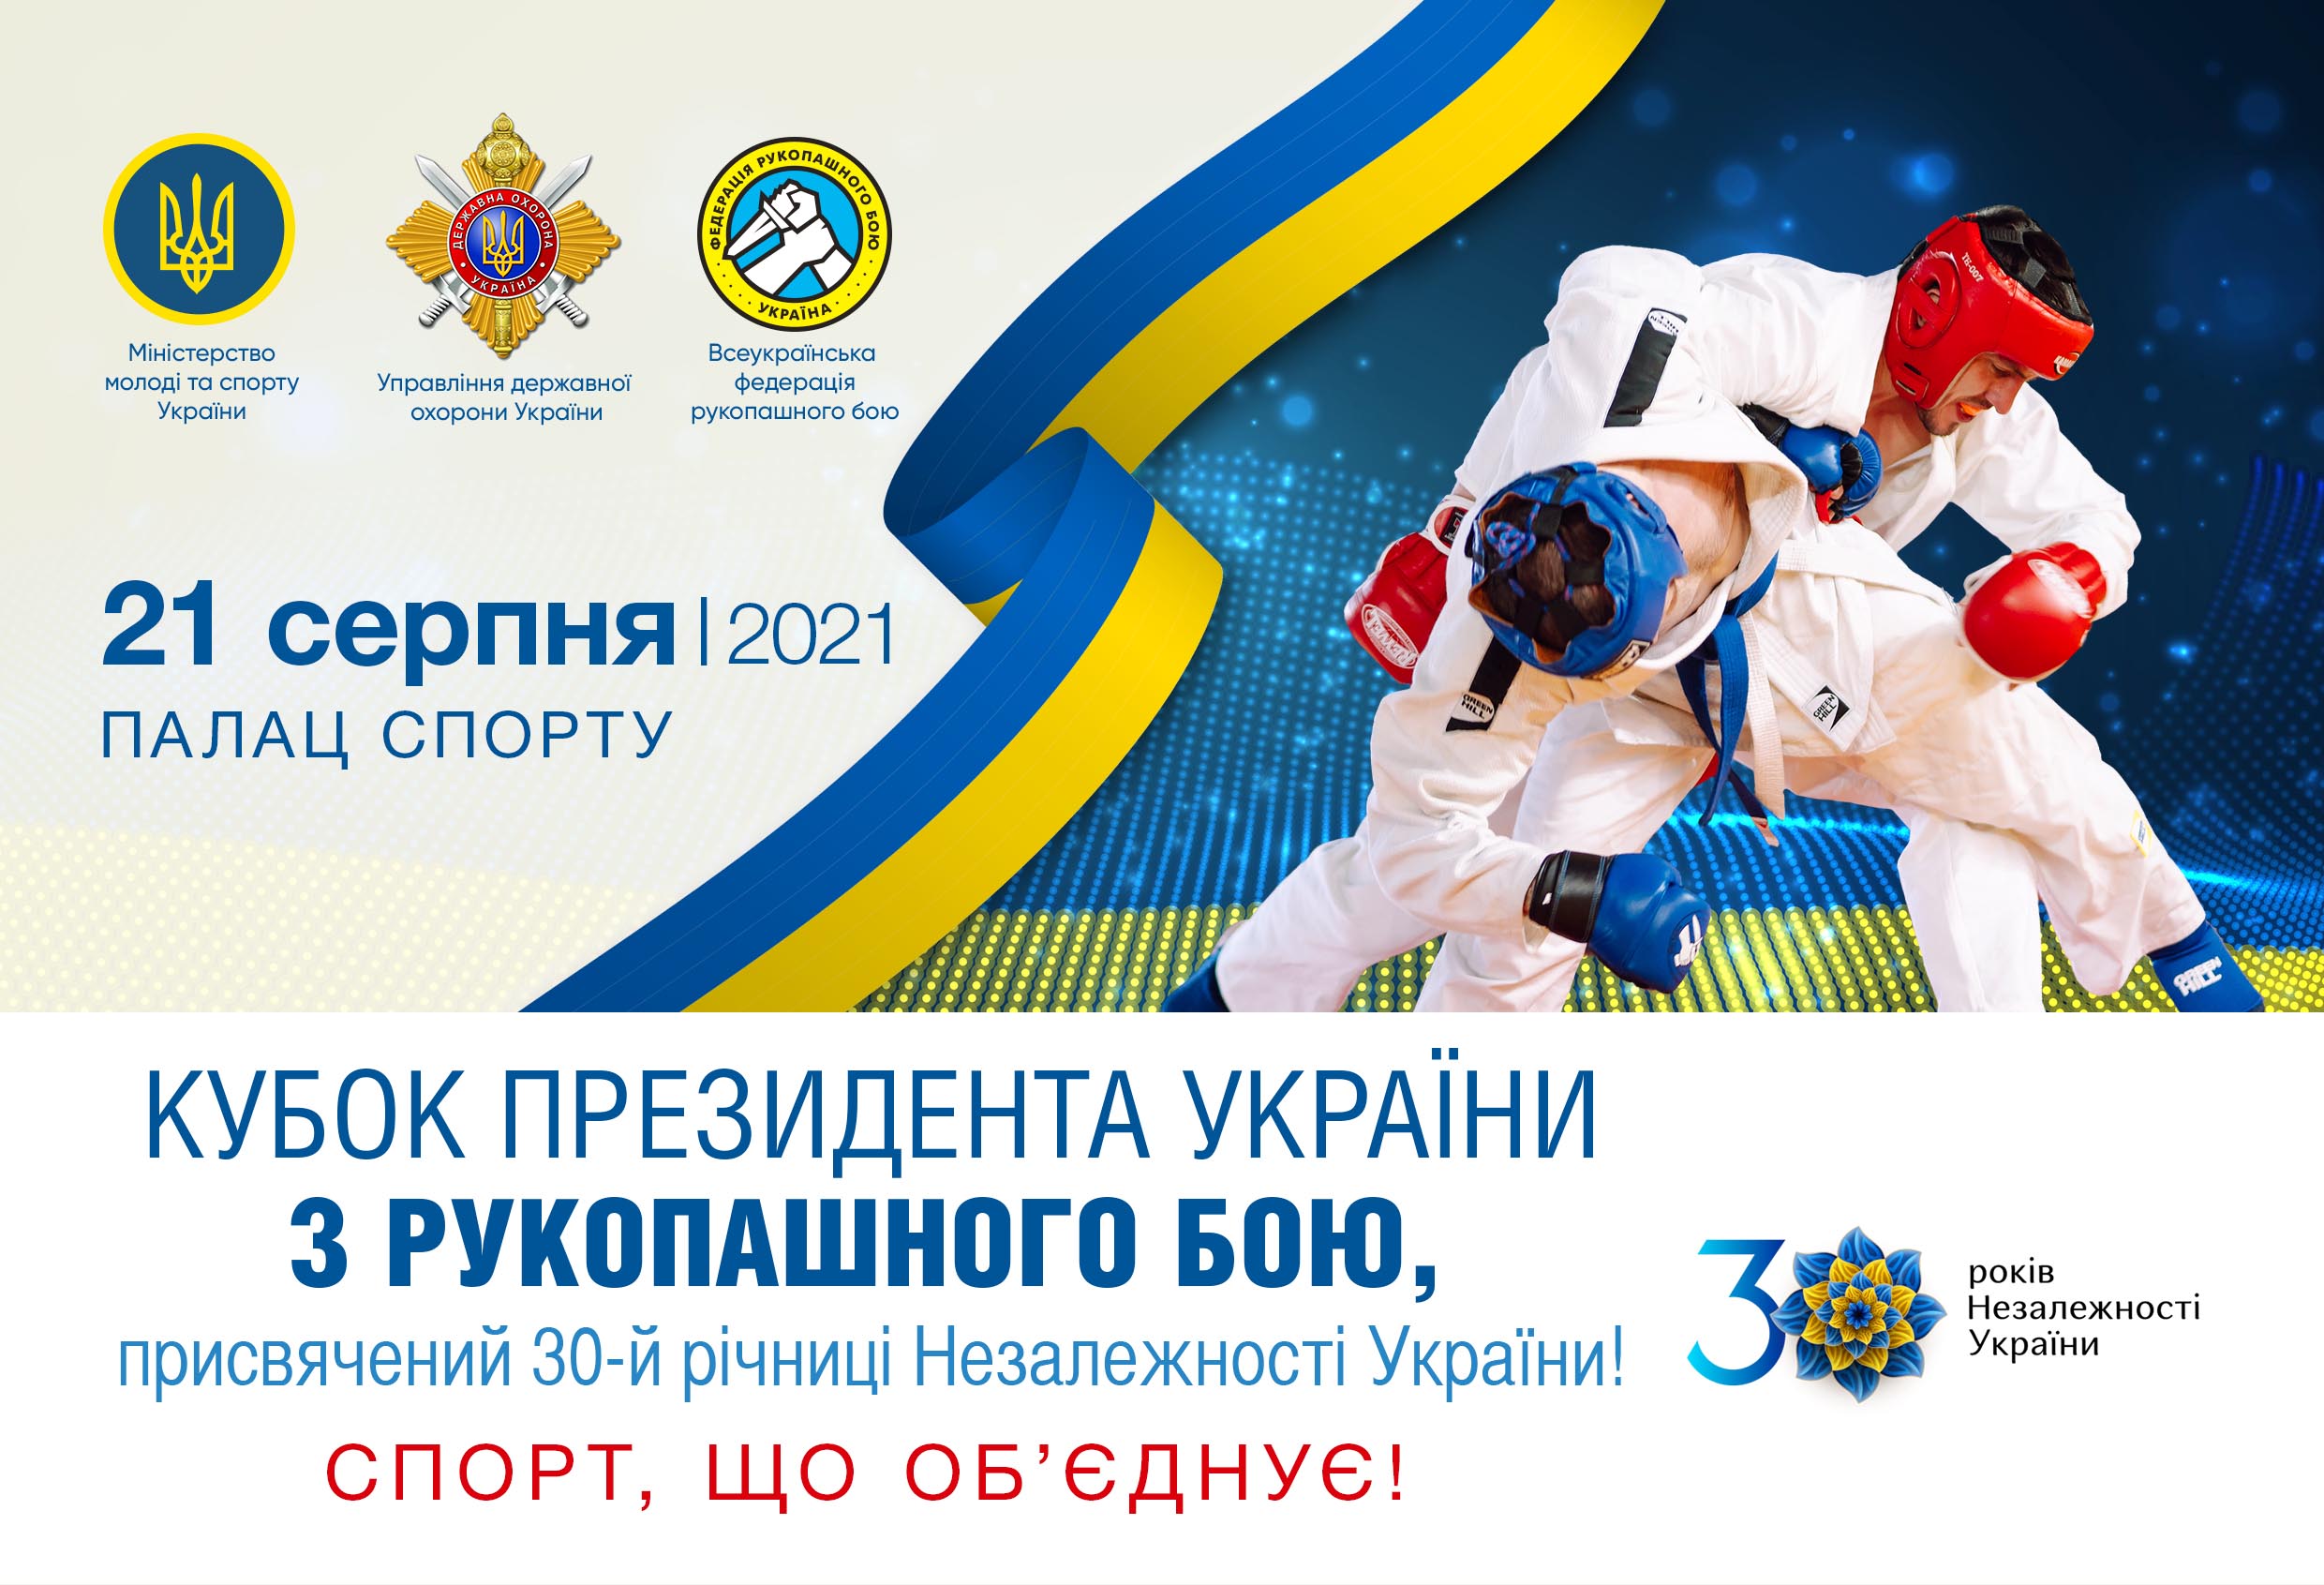 On August 21, in the Palace of Sports will host the Cup of the President of Ukraine in hand-to-hand combat among the national teams of the Armed Forces of Ukraine, law enforcement and special bodies of the state